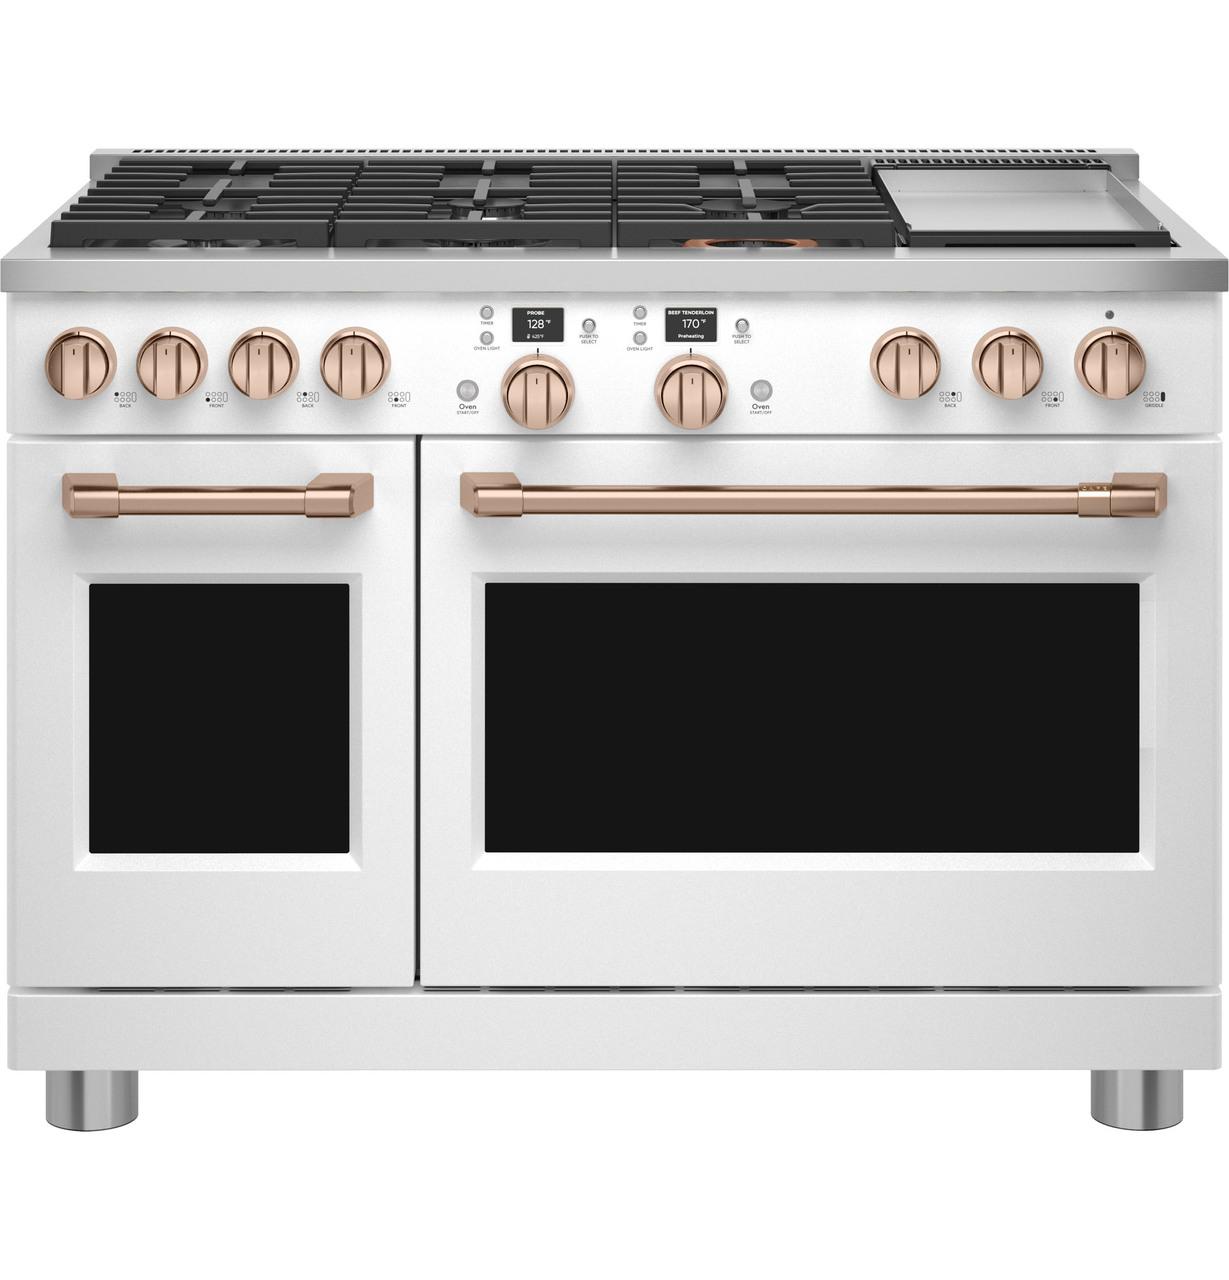 Cafe 36 in. Gas Cooktop in Matte White with 6 Burners CGU366P4TW2